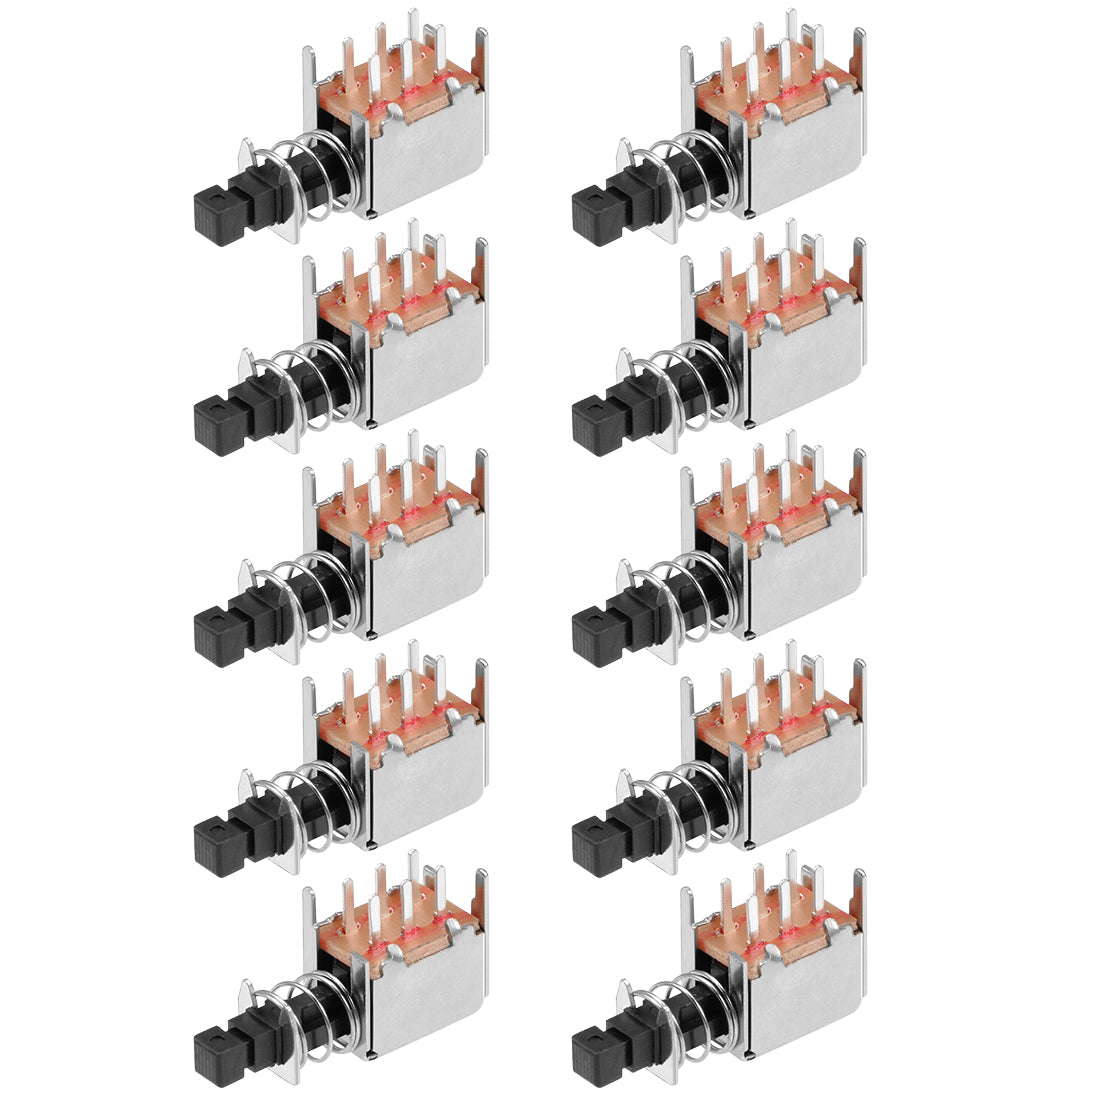 uxcell Uxcell Push Button Switch DPDT 6 Pin 1 Position Self-Locking Black 10pcs